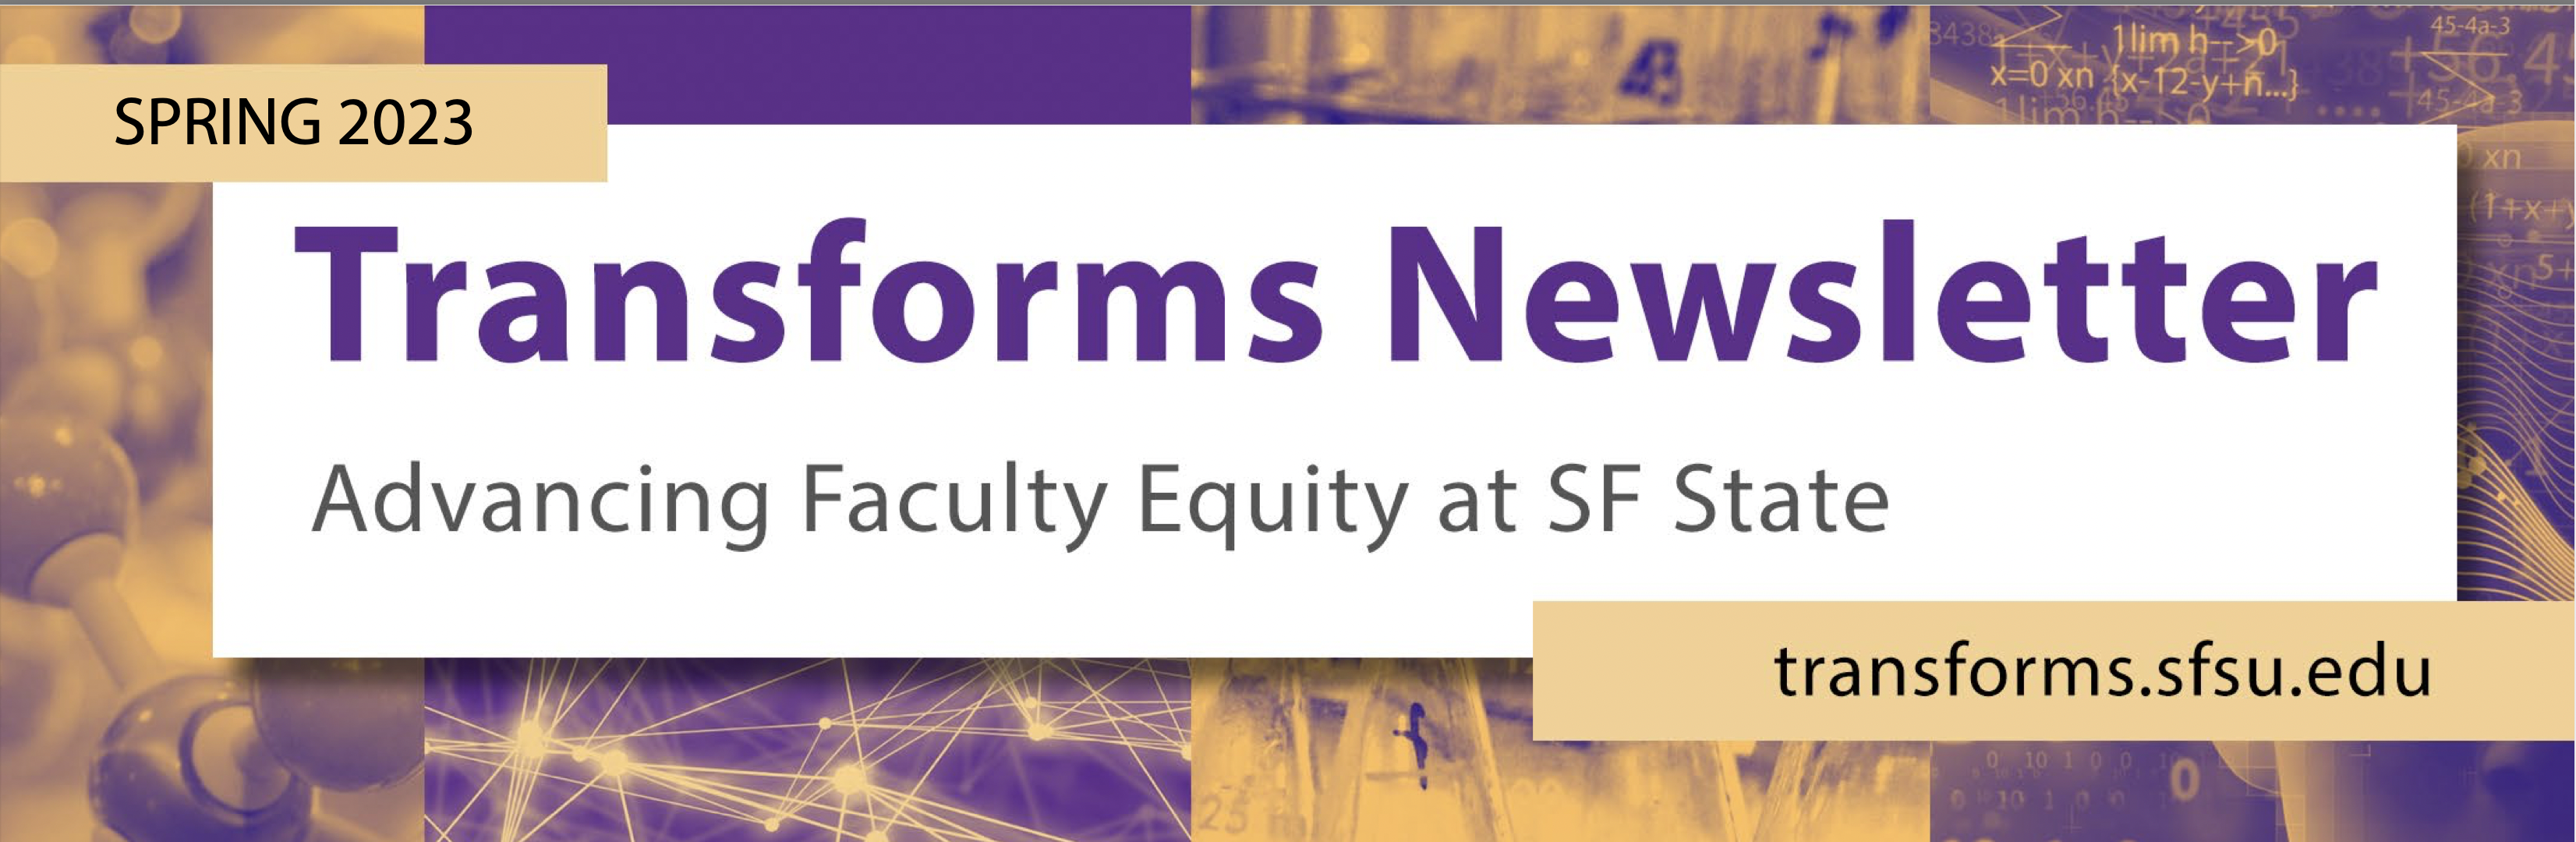 SF State Transforms newsletter banner